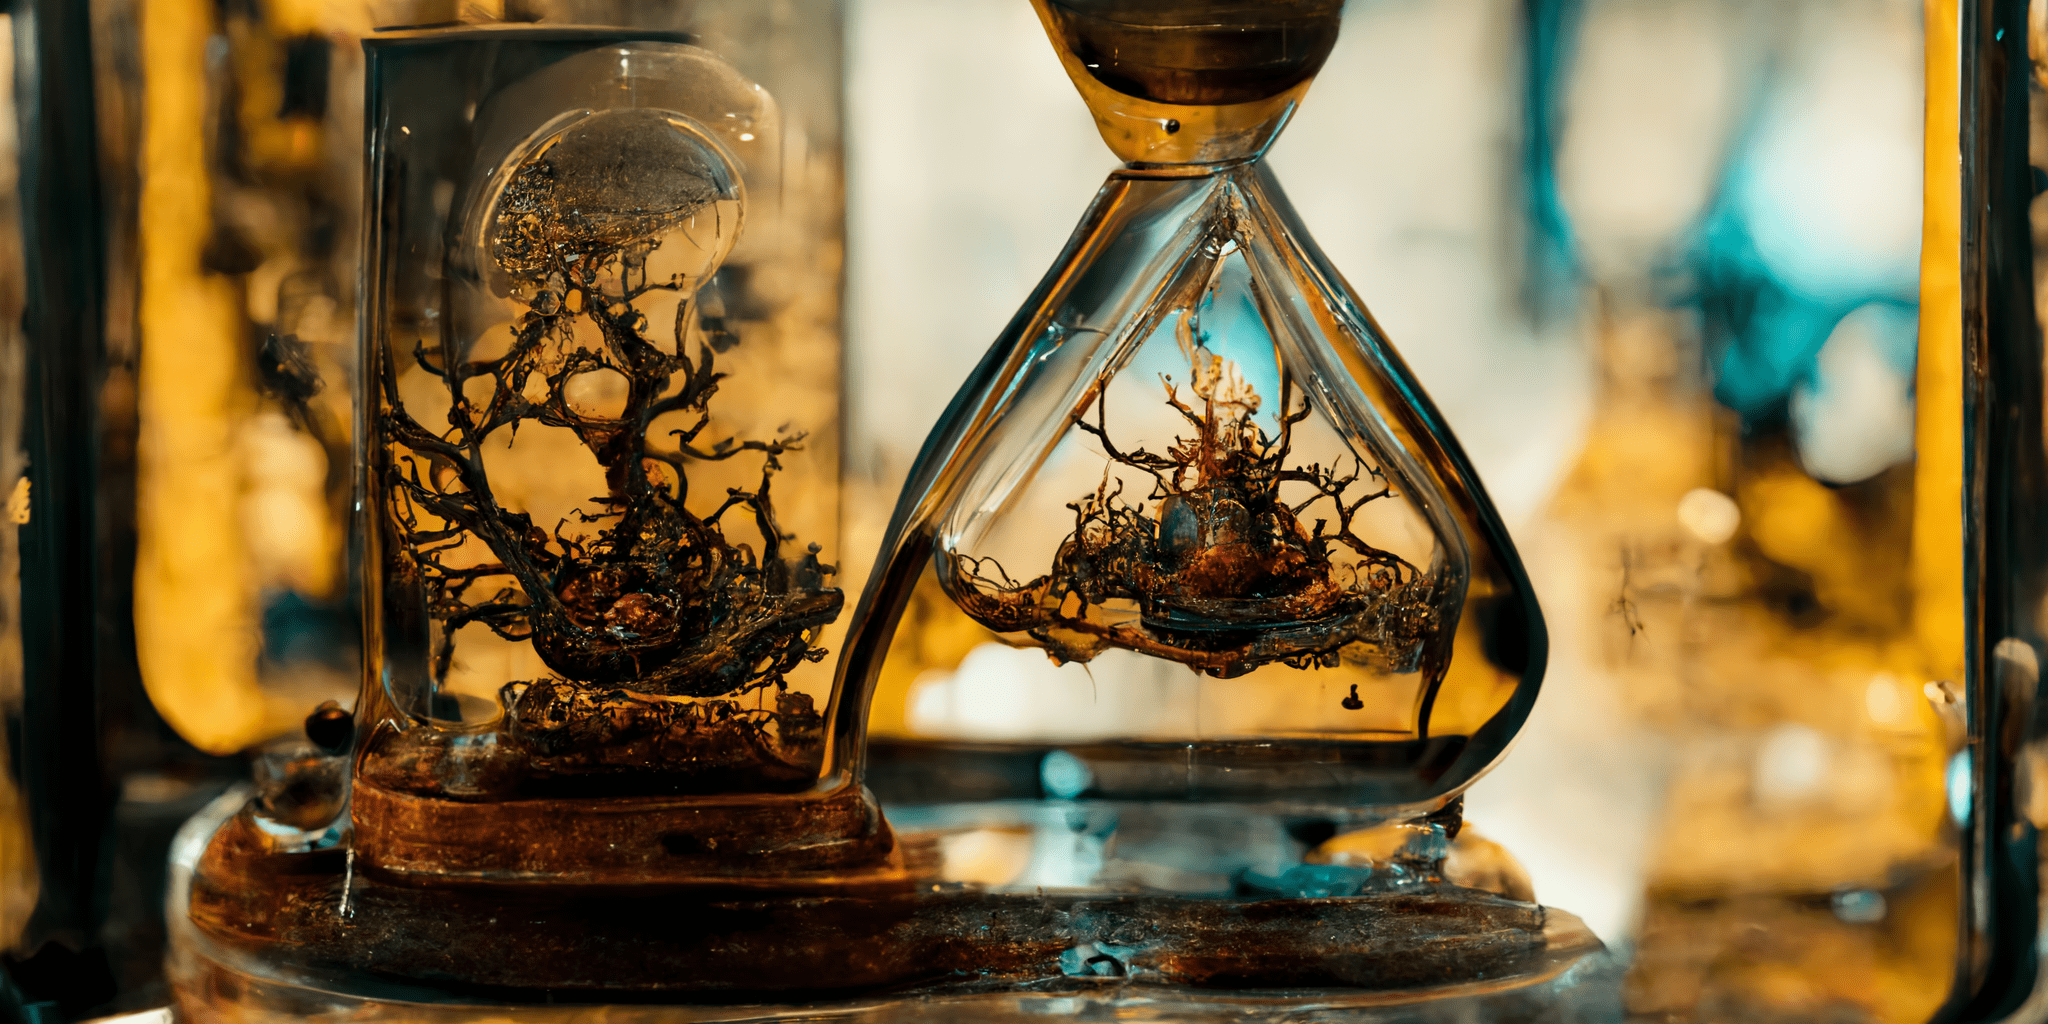 In an hourglass I cannot turn upside down – ships in bottles